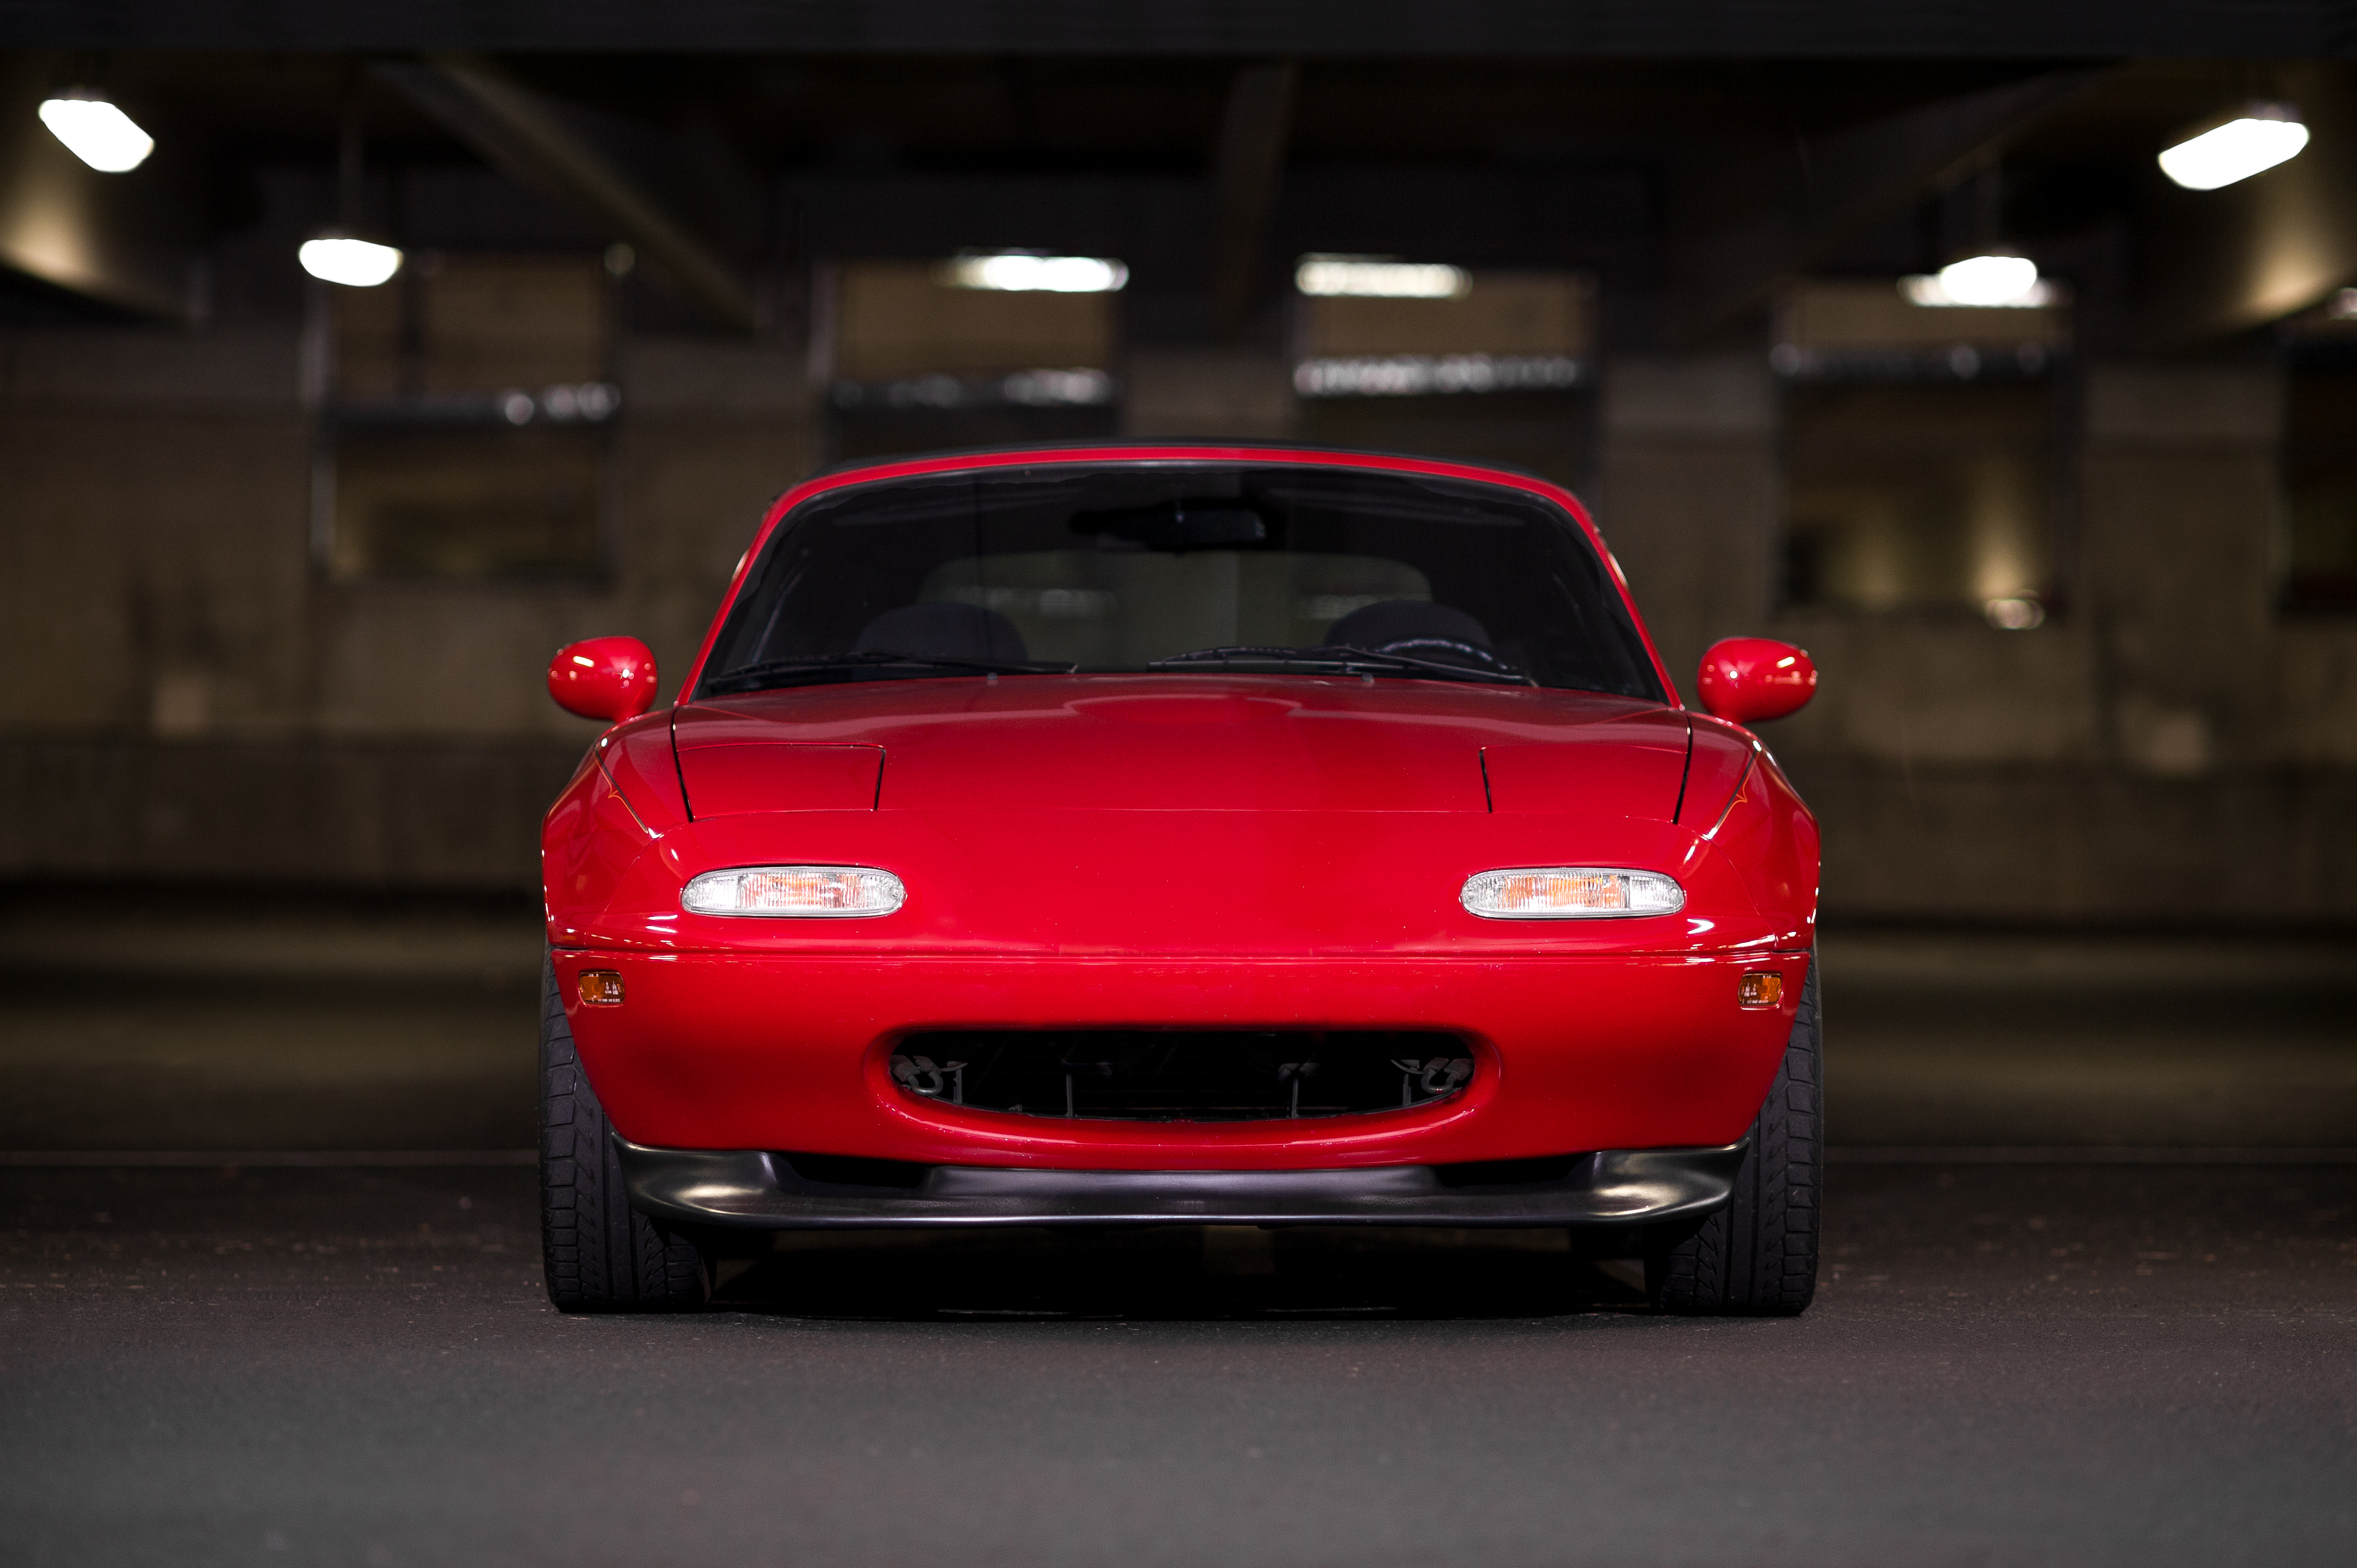 Free download Your Ridiculously Adorable Mazda Miata Wallpaper Is Here [4155x2765] for your Desktop, Mobile & Tablet. Explore Mazda Miata Wallpaper. Mazda Miata Wallpaper, Mazda Miata Wallpaper, 2016 Mazda MX5 Miata Wallpaper